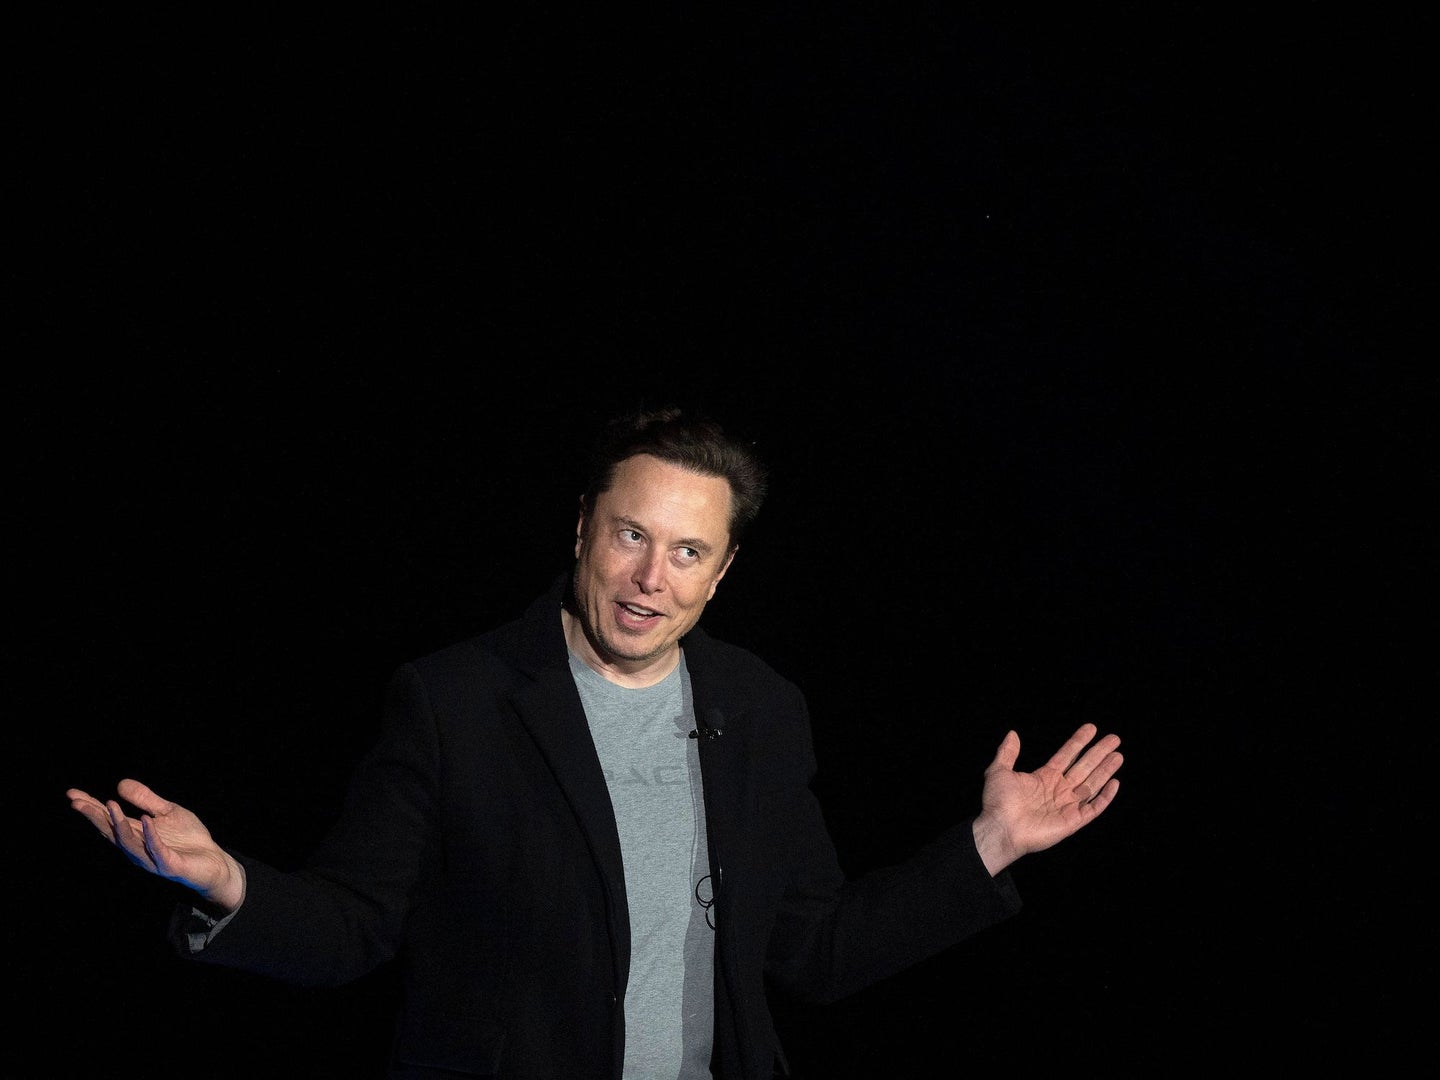 Elon Musk gesturing with both hands up against black background